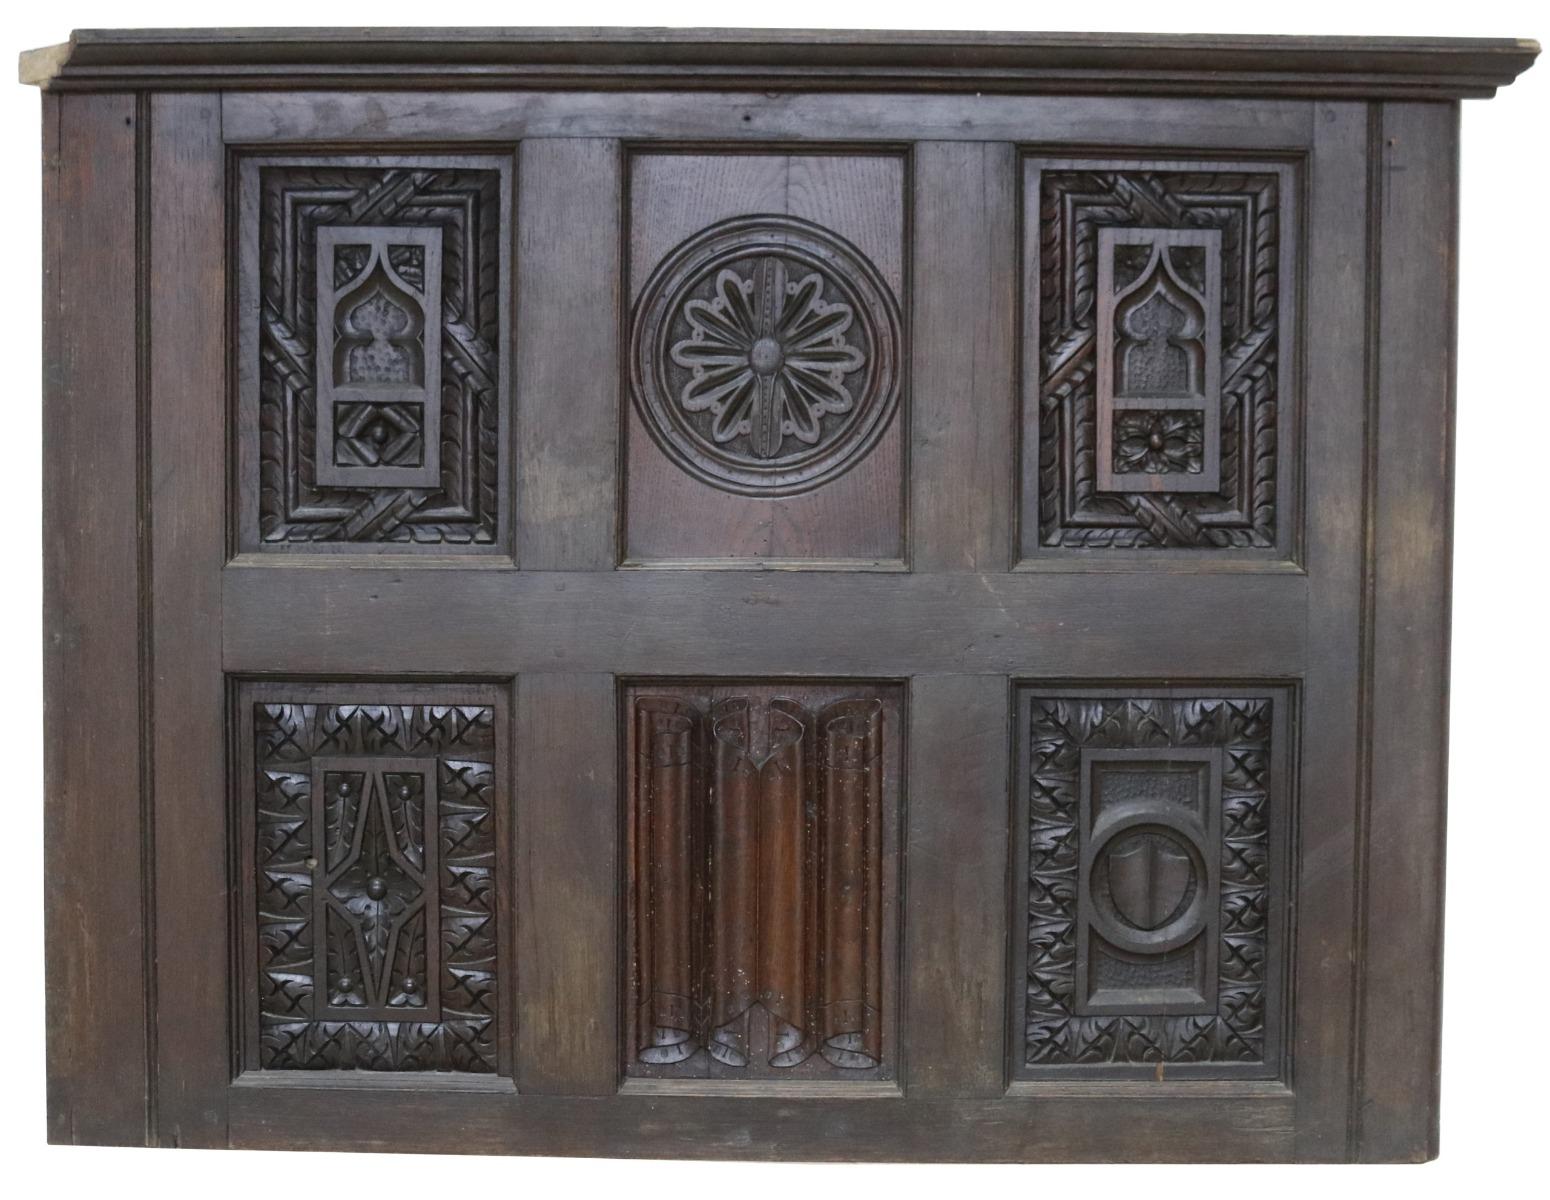 A reclaimed wall panel made from 17th century and later elements, assembled in its current form around 1895. Removed from a large house in Southern England. We have many other panels from this source.